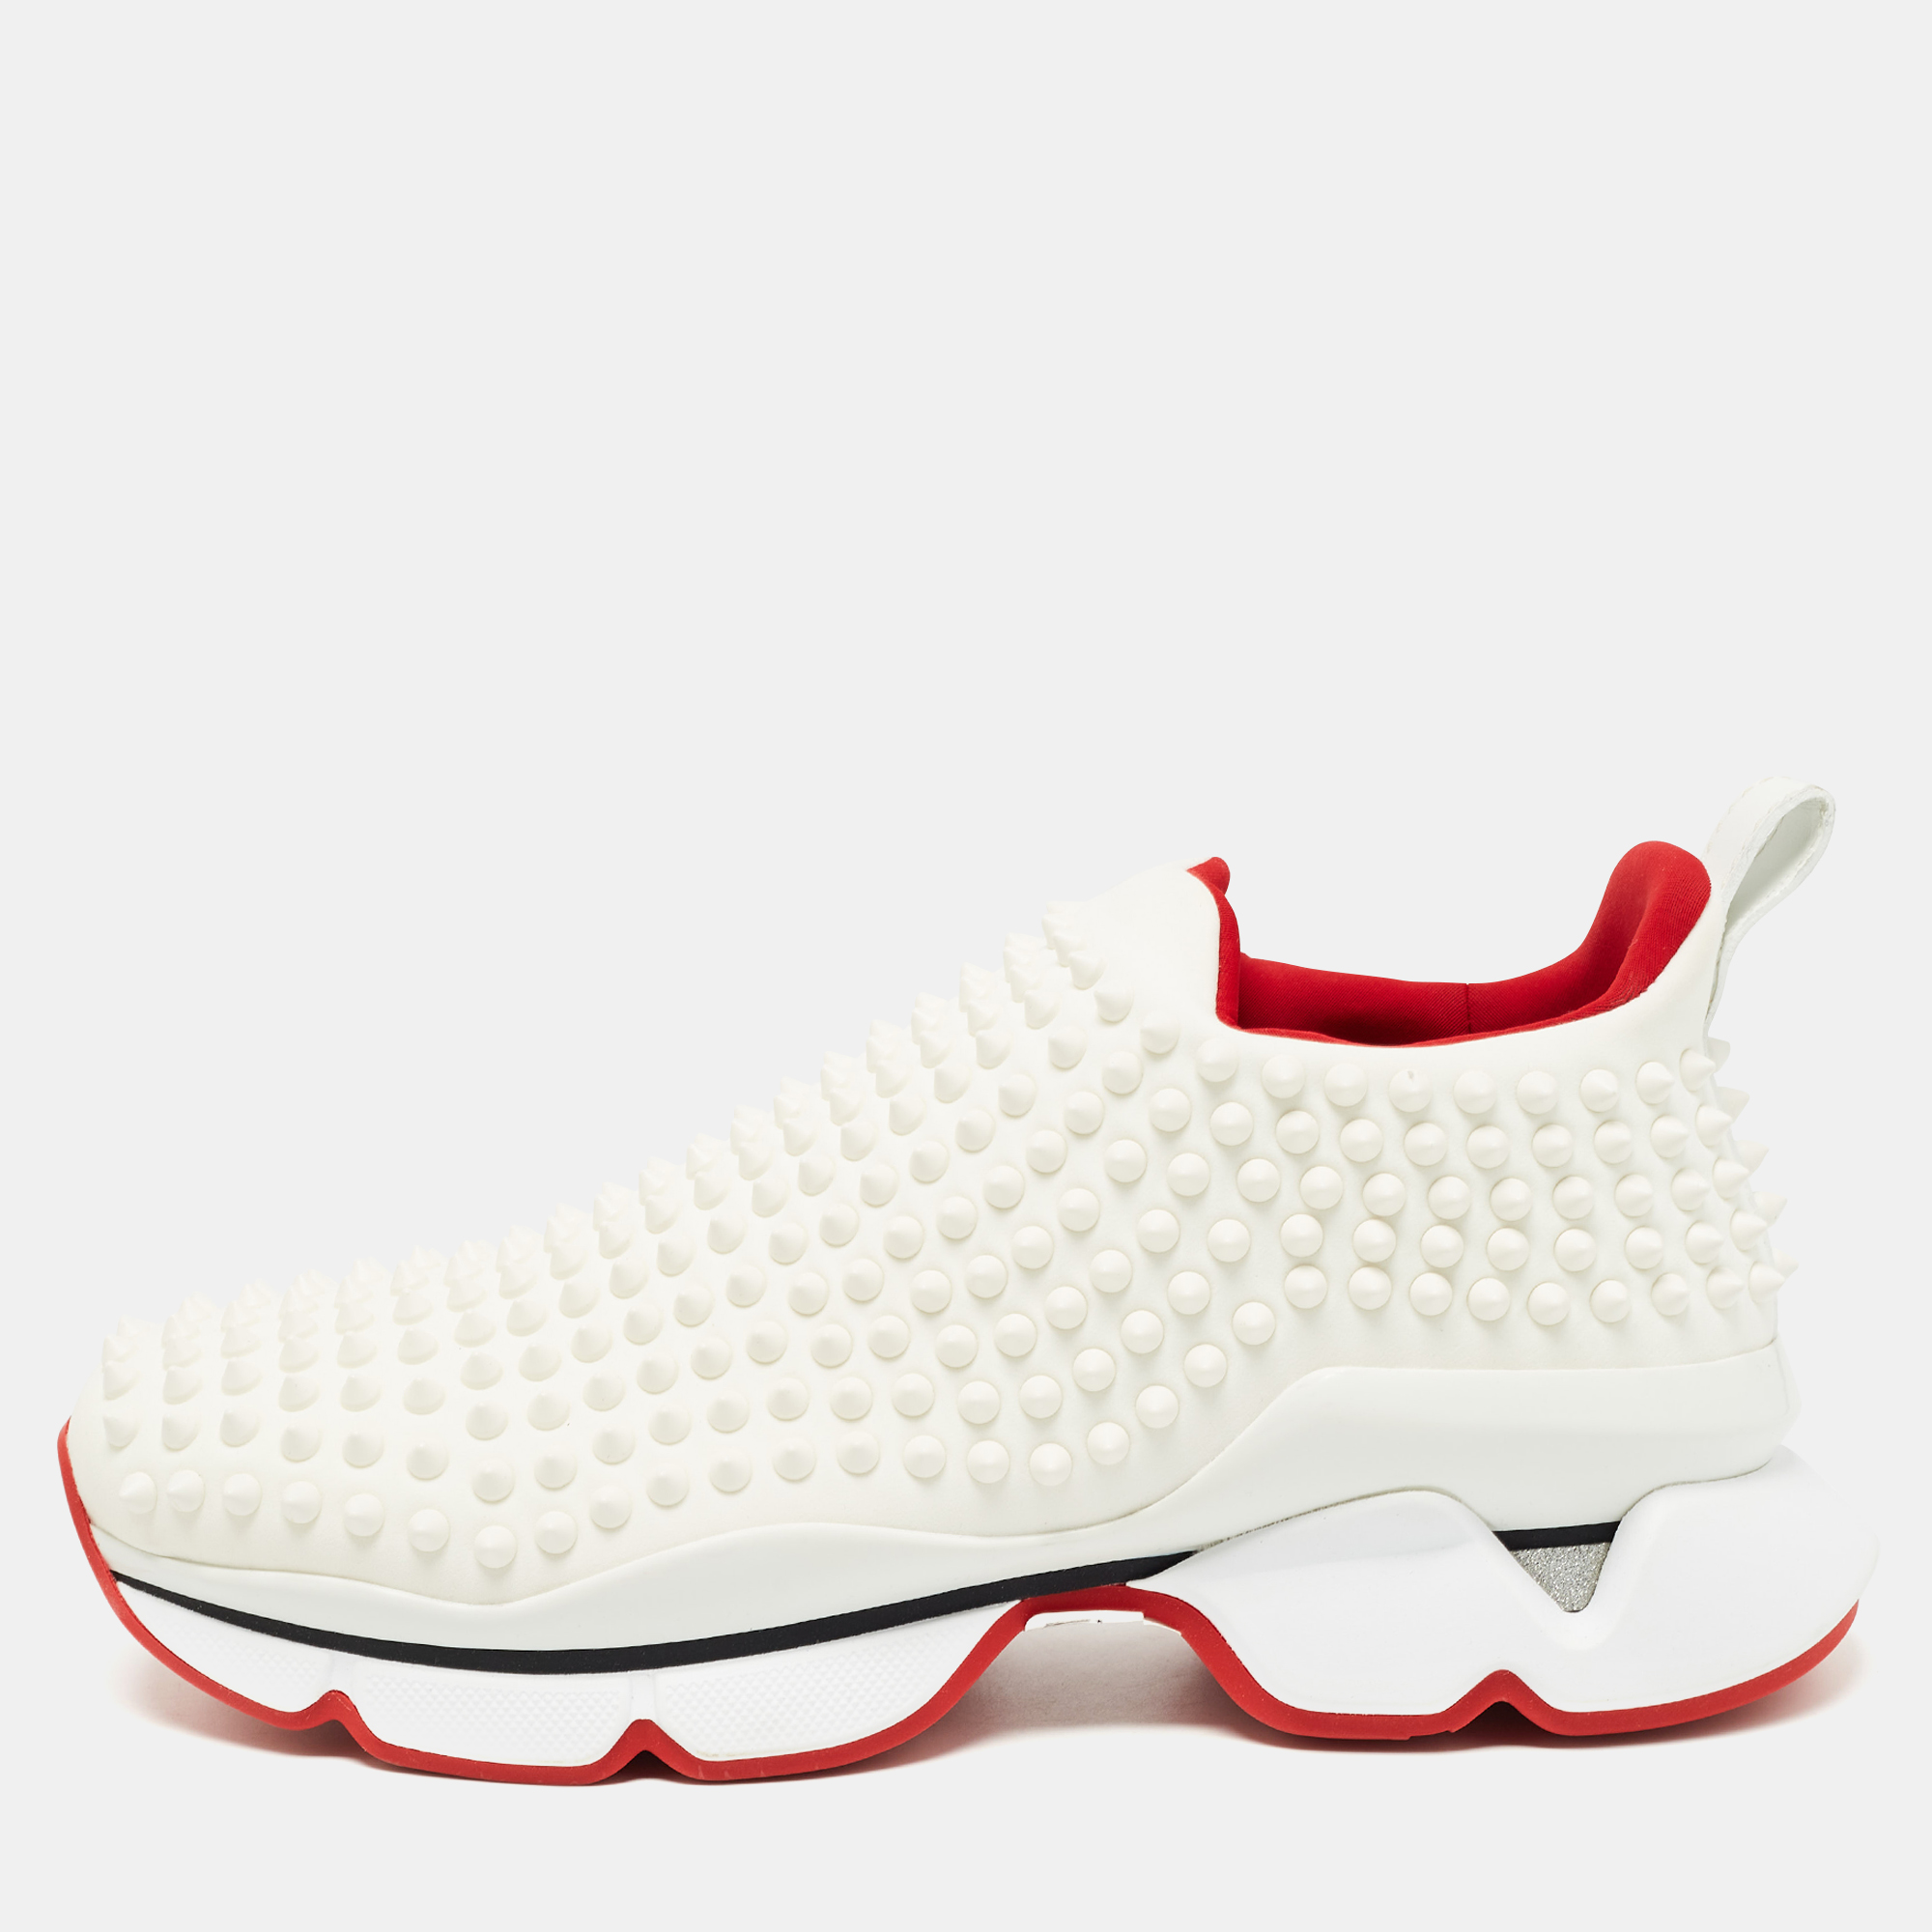 Inspired by the classic Louboutin heels this pair of sneakers bring together effortless comfort and modish style. Featuring an eye catching spike embellished design in a sleek white shade this pair of sneakers comes with a stylish sock slip on construction that makes for a savvy look.